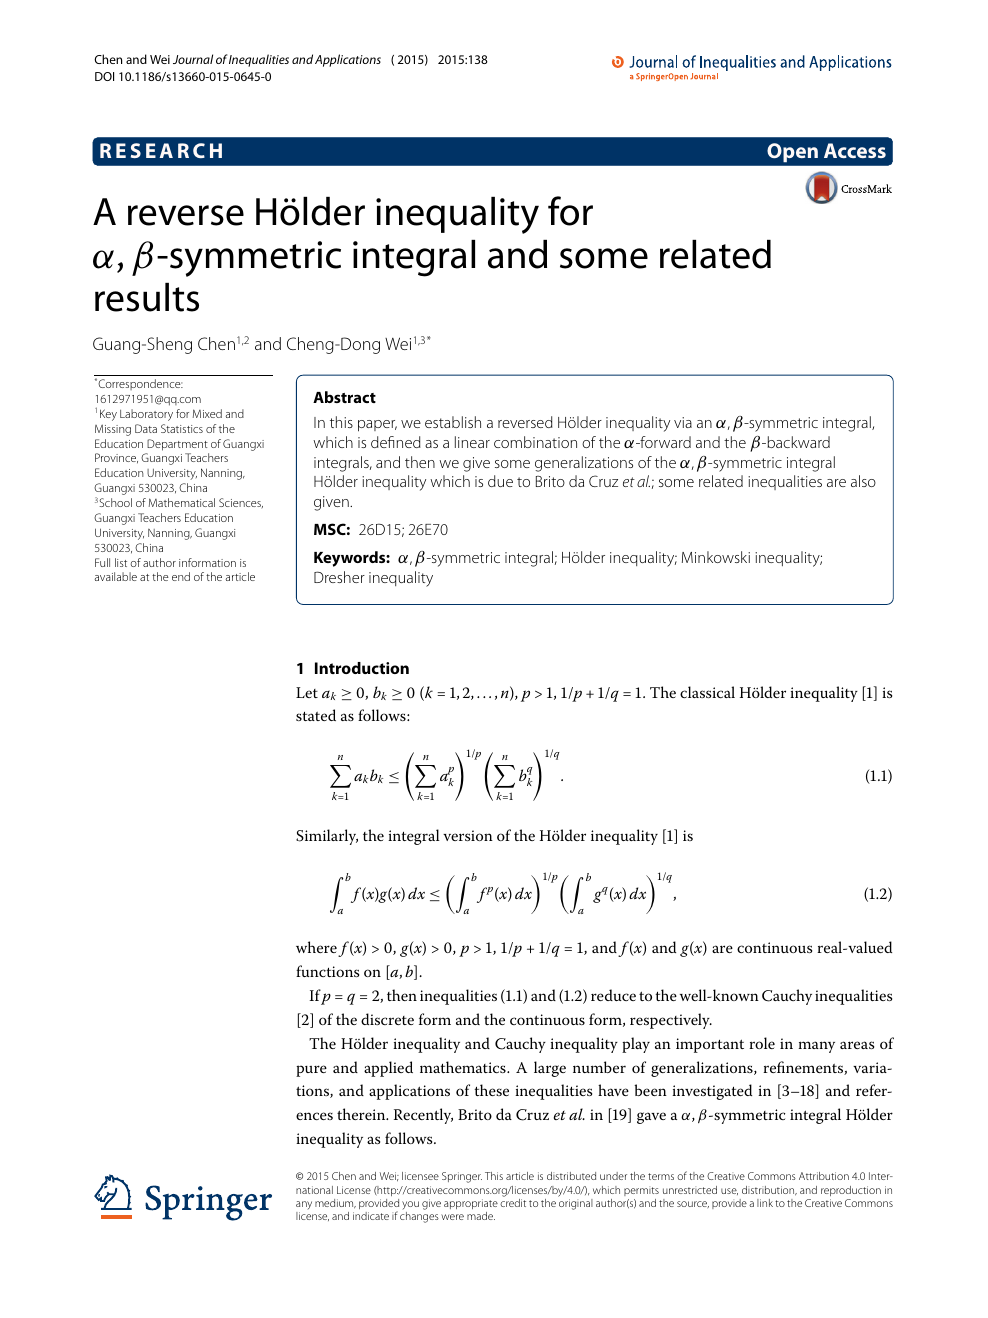 A Reverse Holder Inequality For A B Alpha Beta Symmetric Integral And Some Related Results Topic Of Research Paper In Mathematics Download Scholarly Article Pdf And Read For Free On Cyberleninka